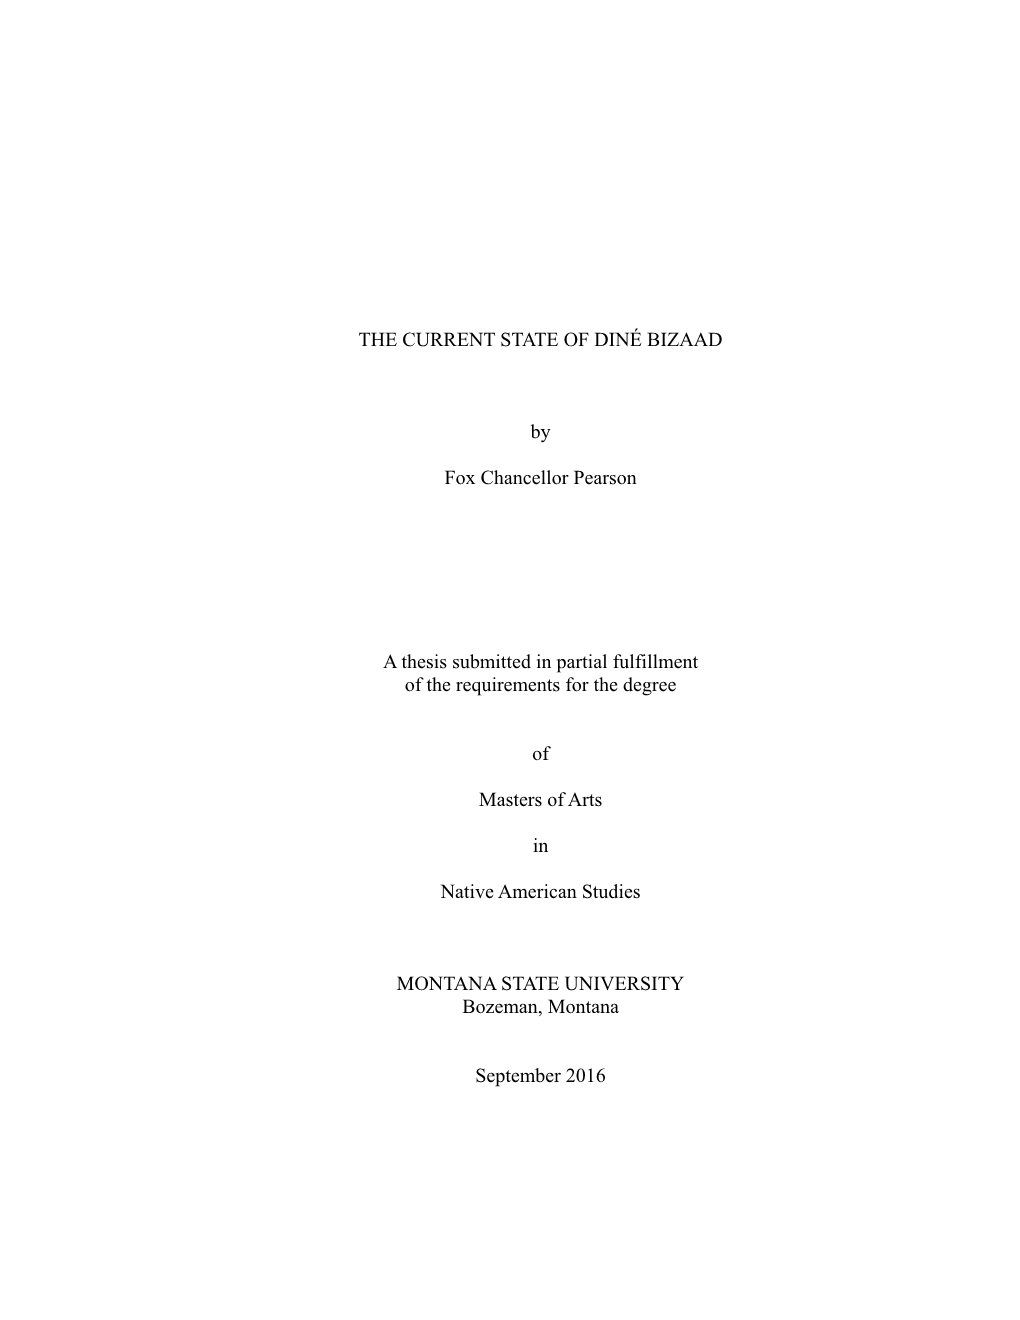 1 the CURRENT STATE of DINÉ BIZAAD by Fox Chancellor Pearson a Thesis Submitted in Partial Fulfillment of the Requirements